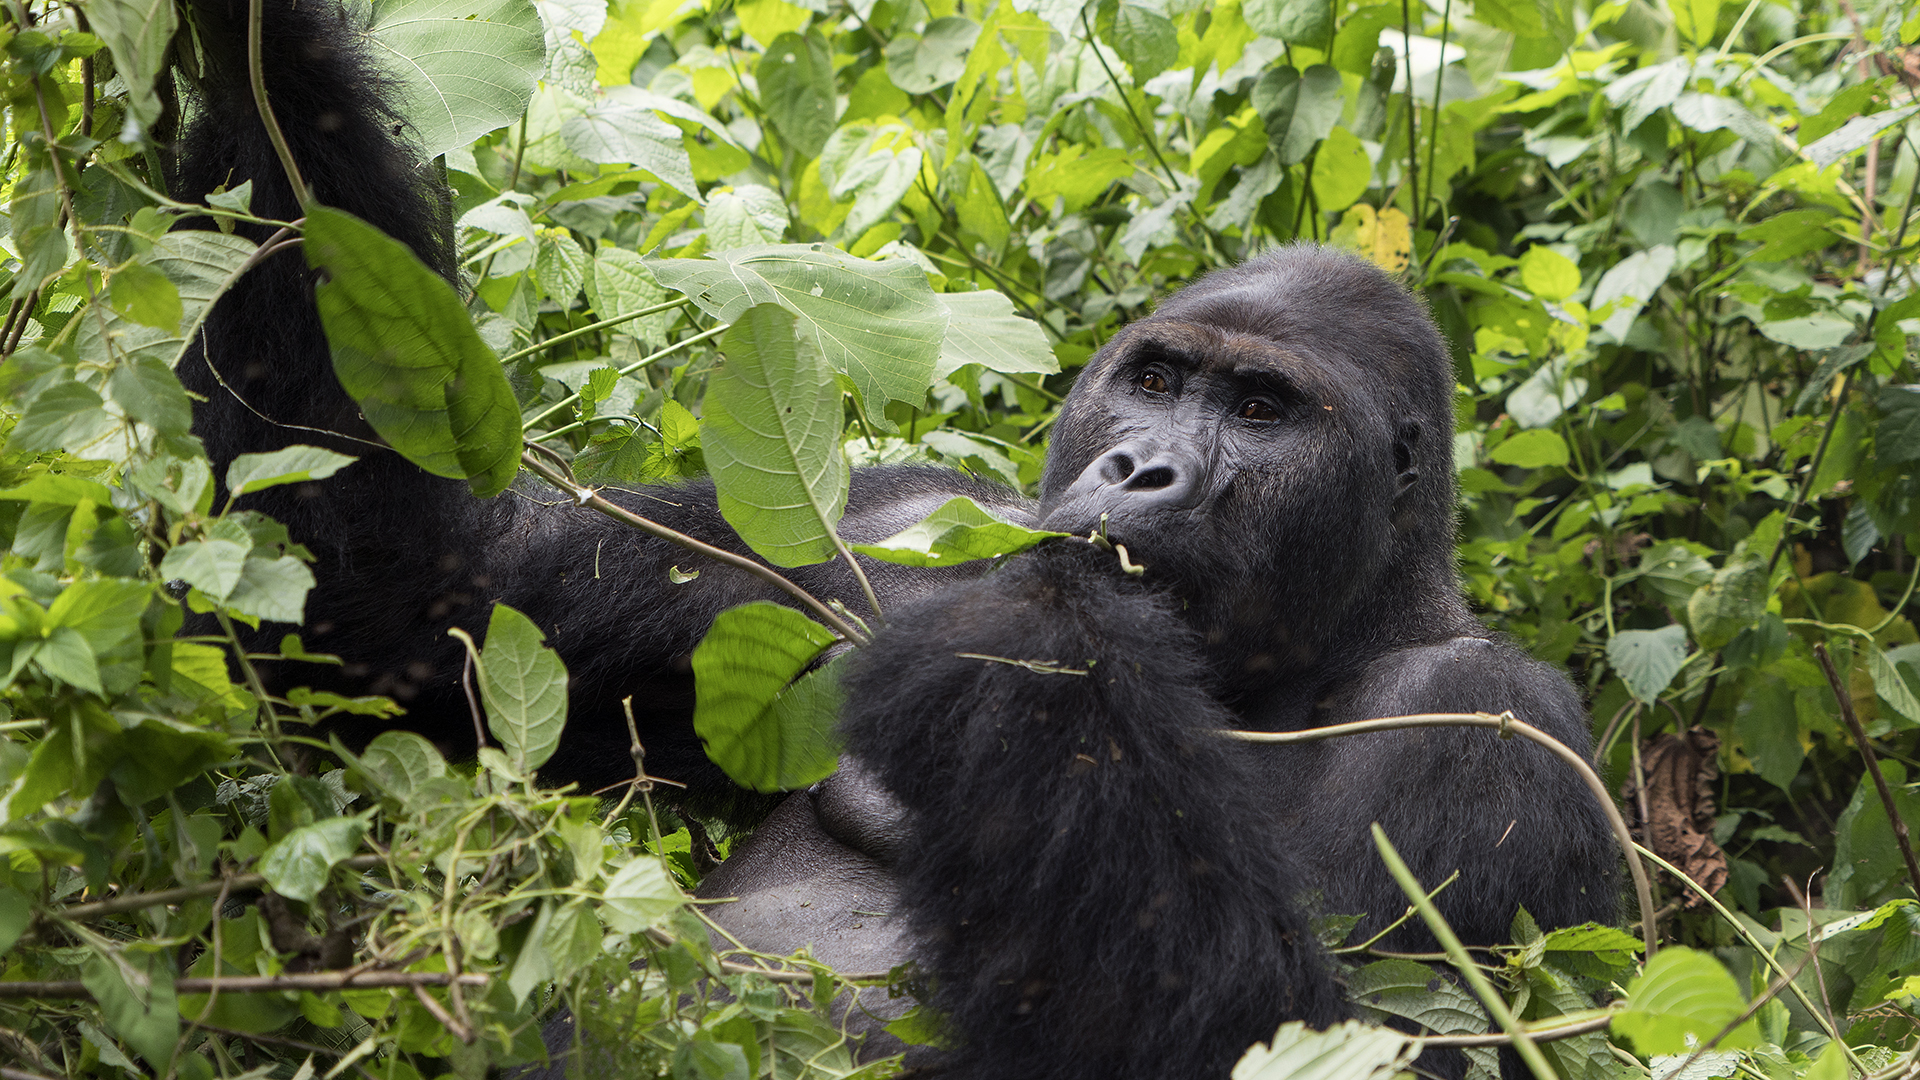 A gorilla sits in the forest eating leaves from a branch